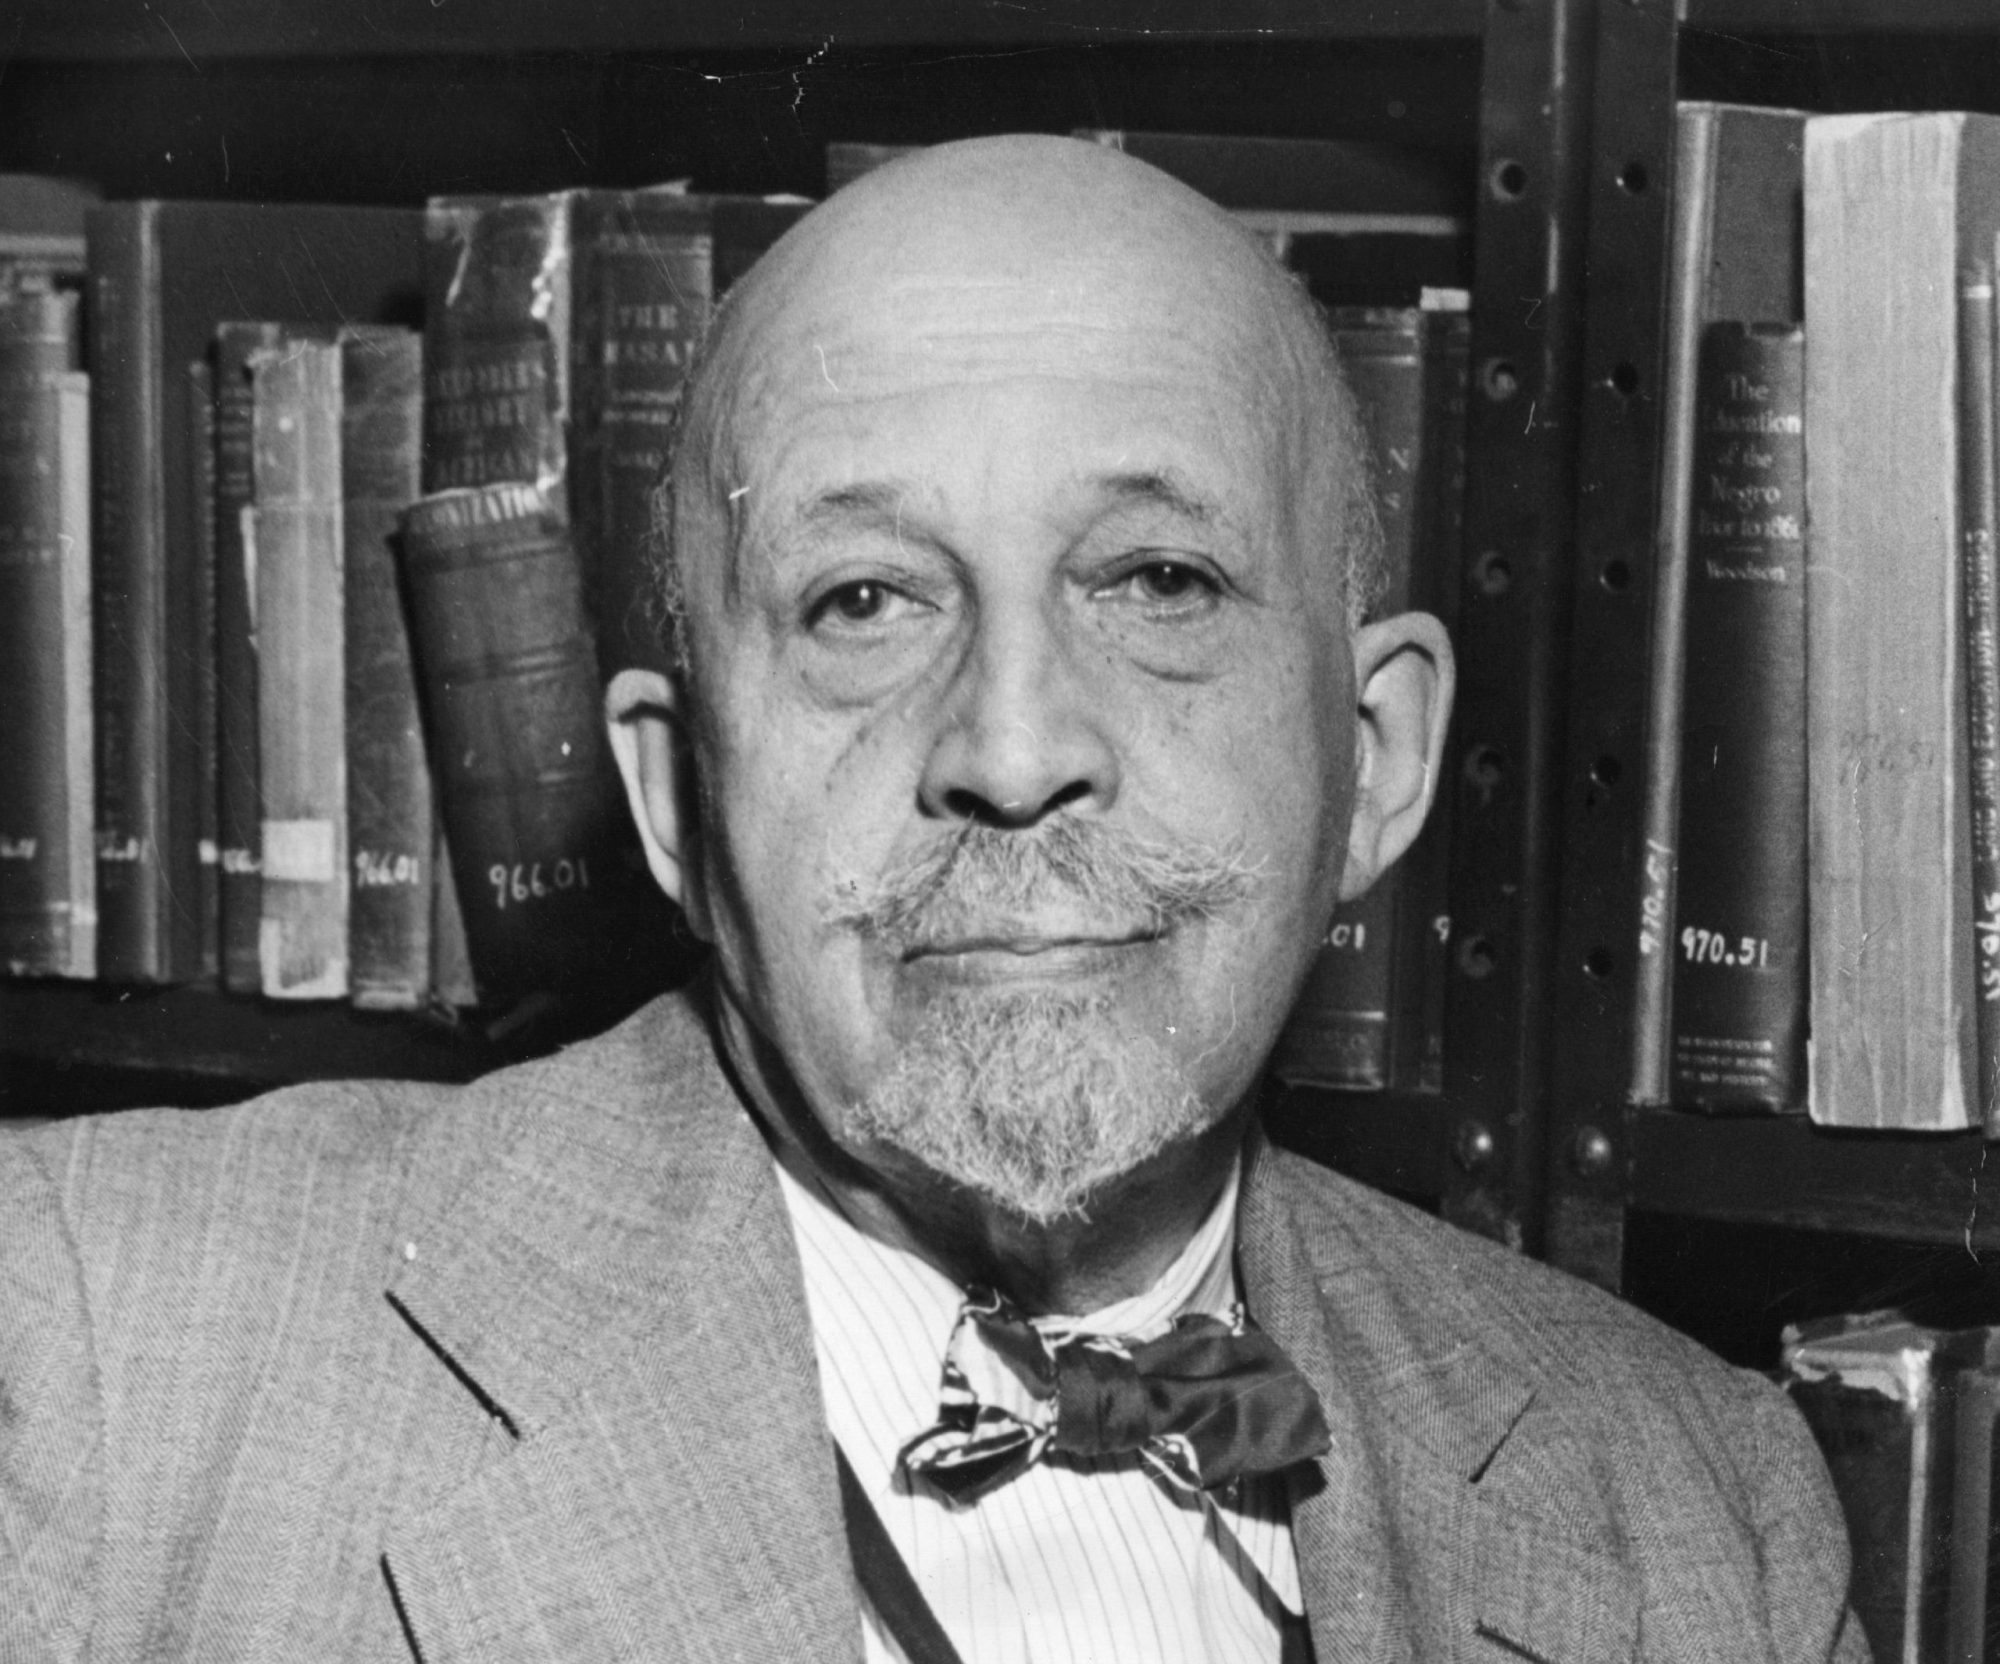 Photo of 82-year-old Dr. William Edward Burghardt Du Bois (1868 - 1963), co-founder of the National Association for the Advancement of Colored People (NAACP), taken on Jan. 1, 1950.